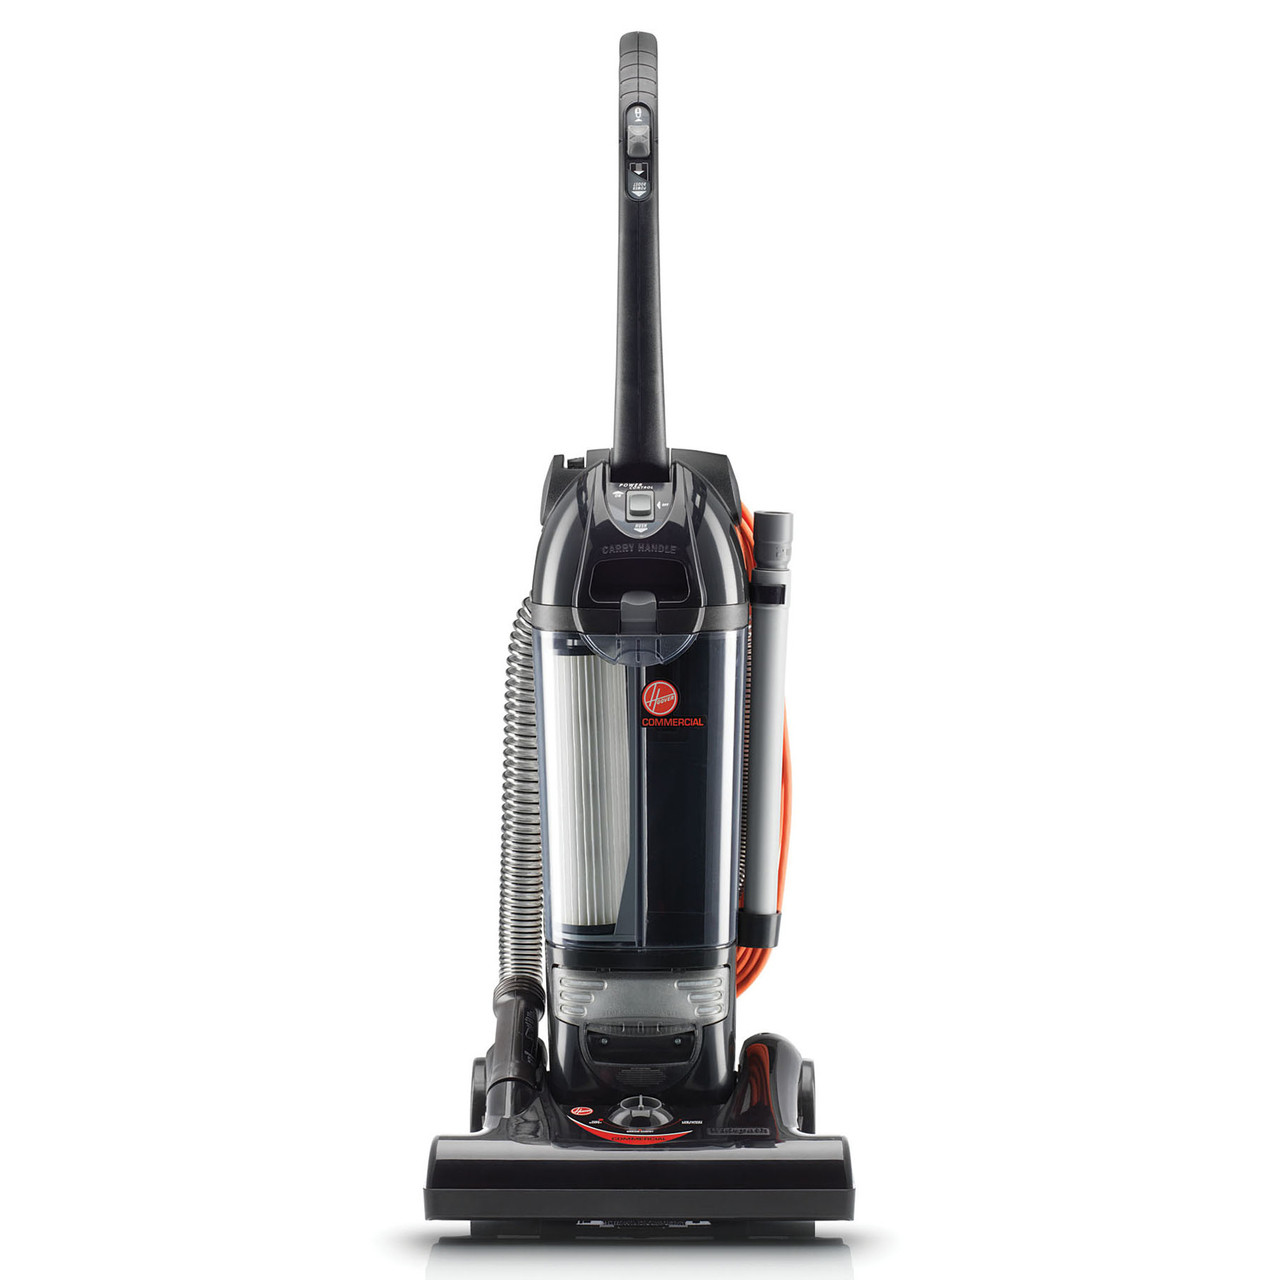 Hoover Lightweight Commercial Bagless Upright Vacuum C1660-900 - Bank's Vacuum Corporation